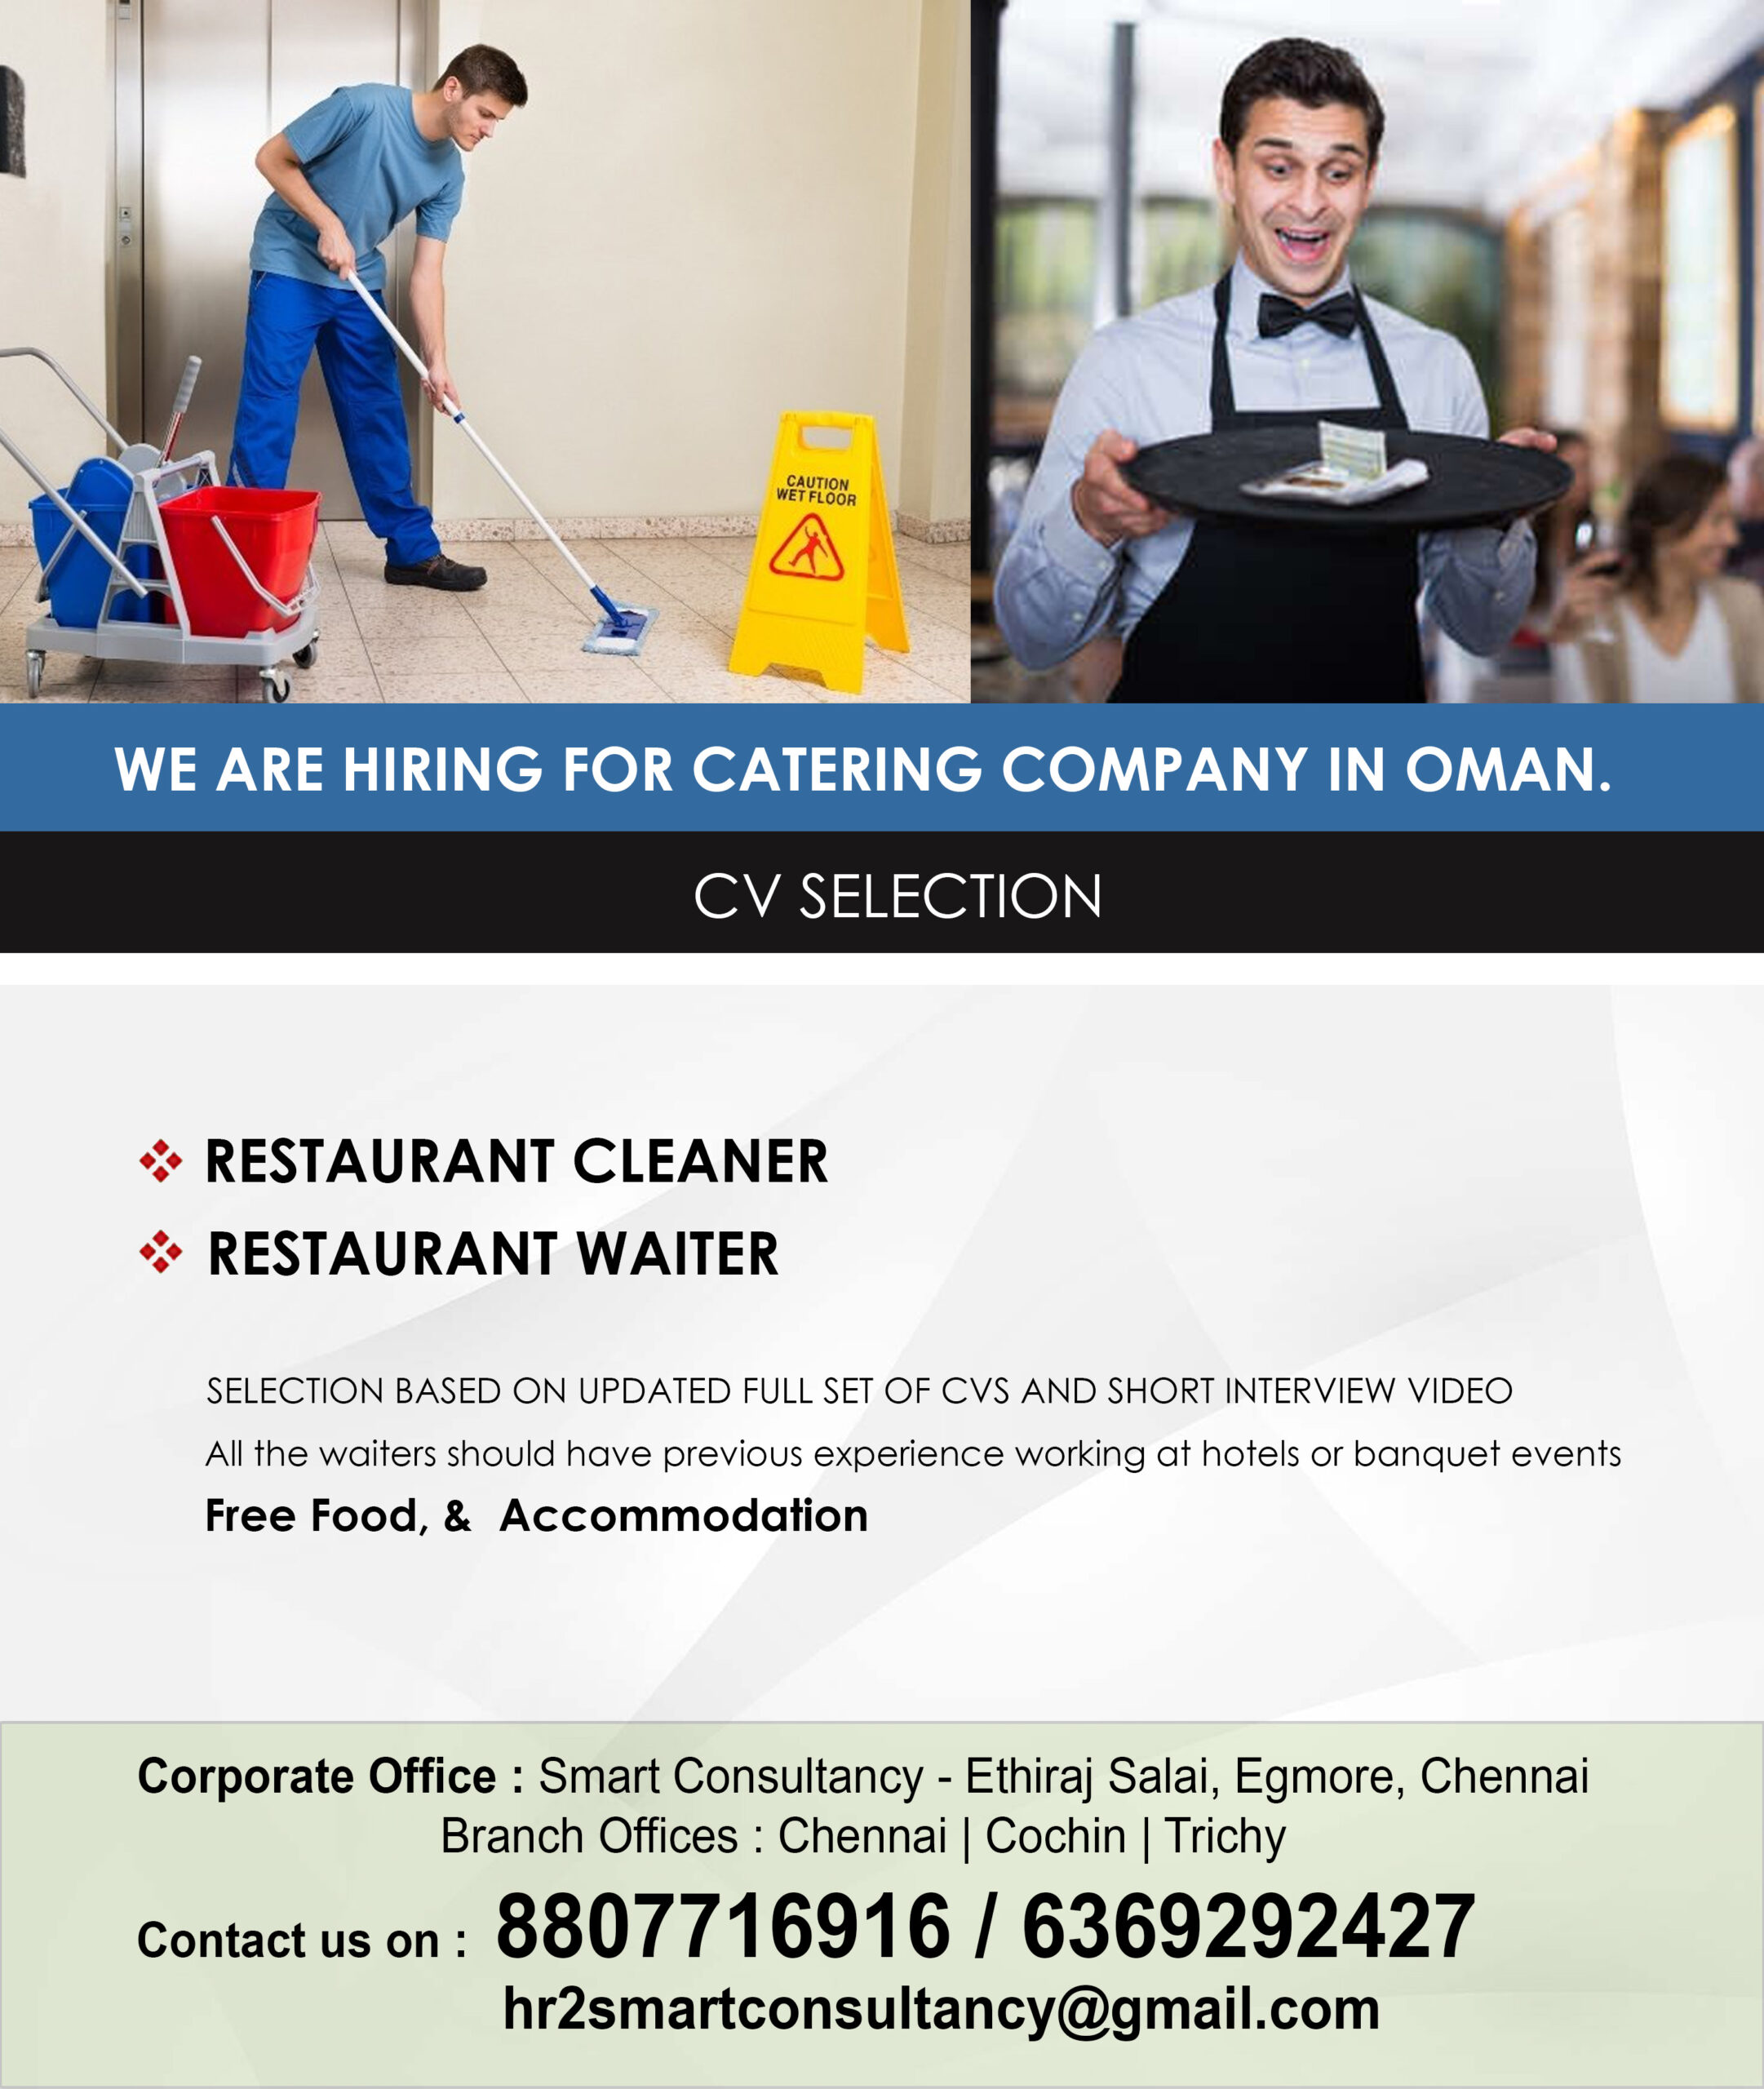 WE ARE HIRING for Catering company in Oman. CV SELECTION & SHORT INTERVIEW VIDEO